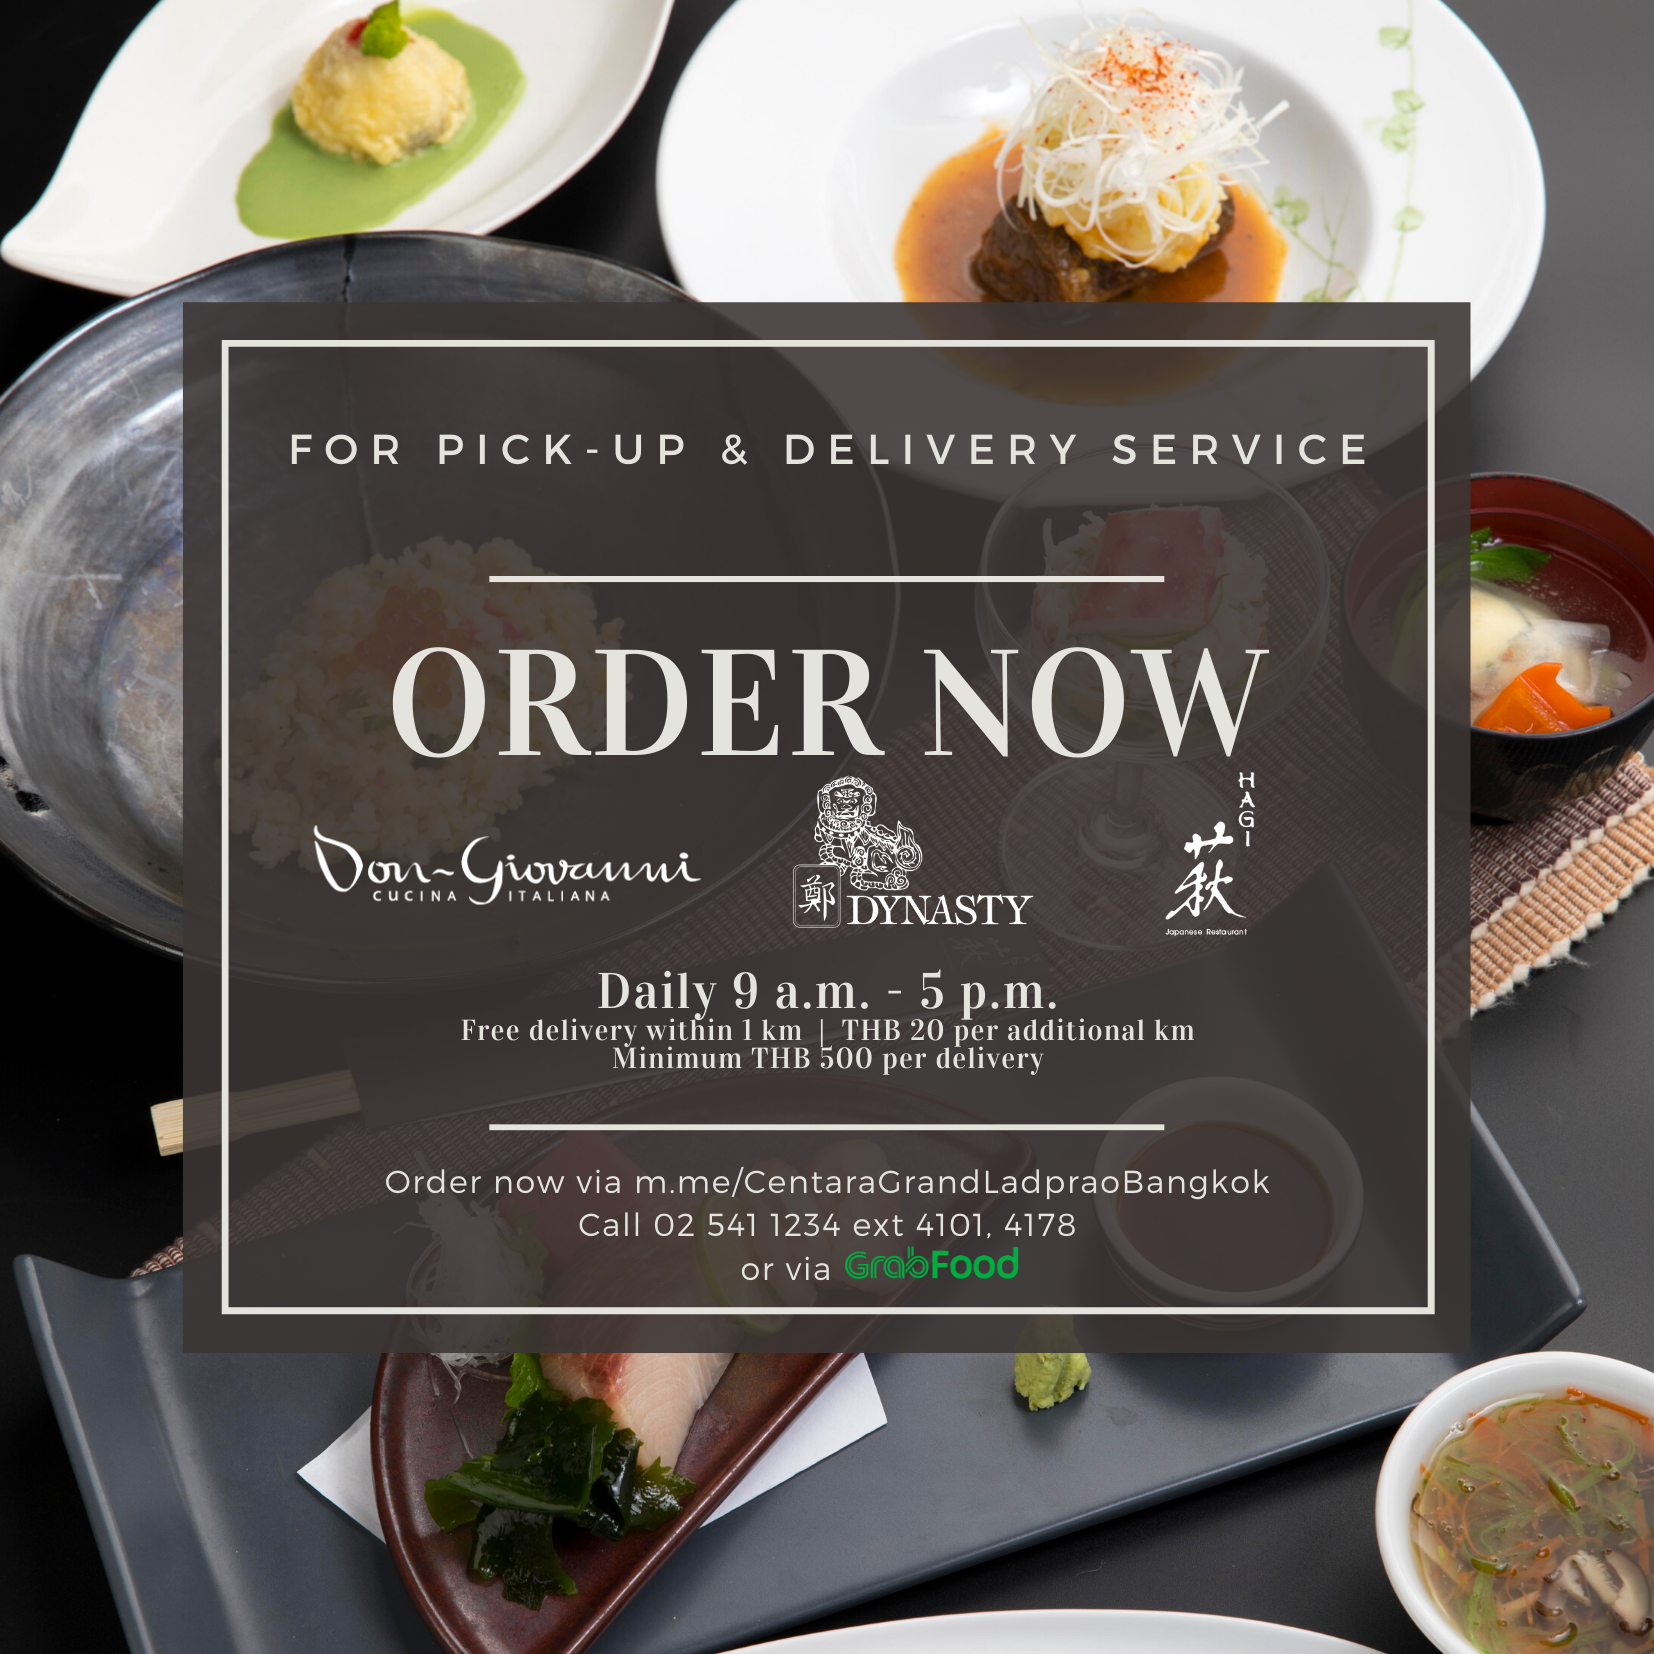 Centara Grand at Central Plaza Ladprao Bangkok launches its takeaway and food delivery service inviting guests to taste the best of award-winning restaurants at their doorstep